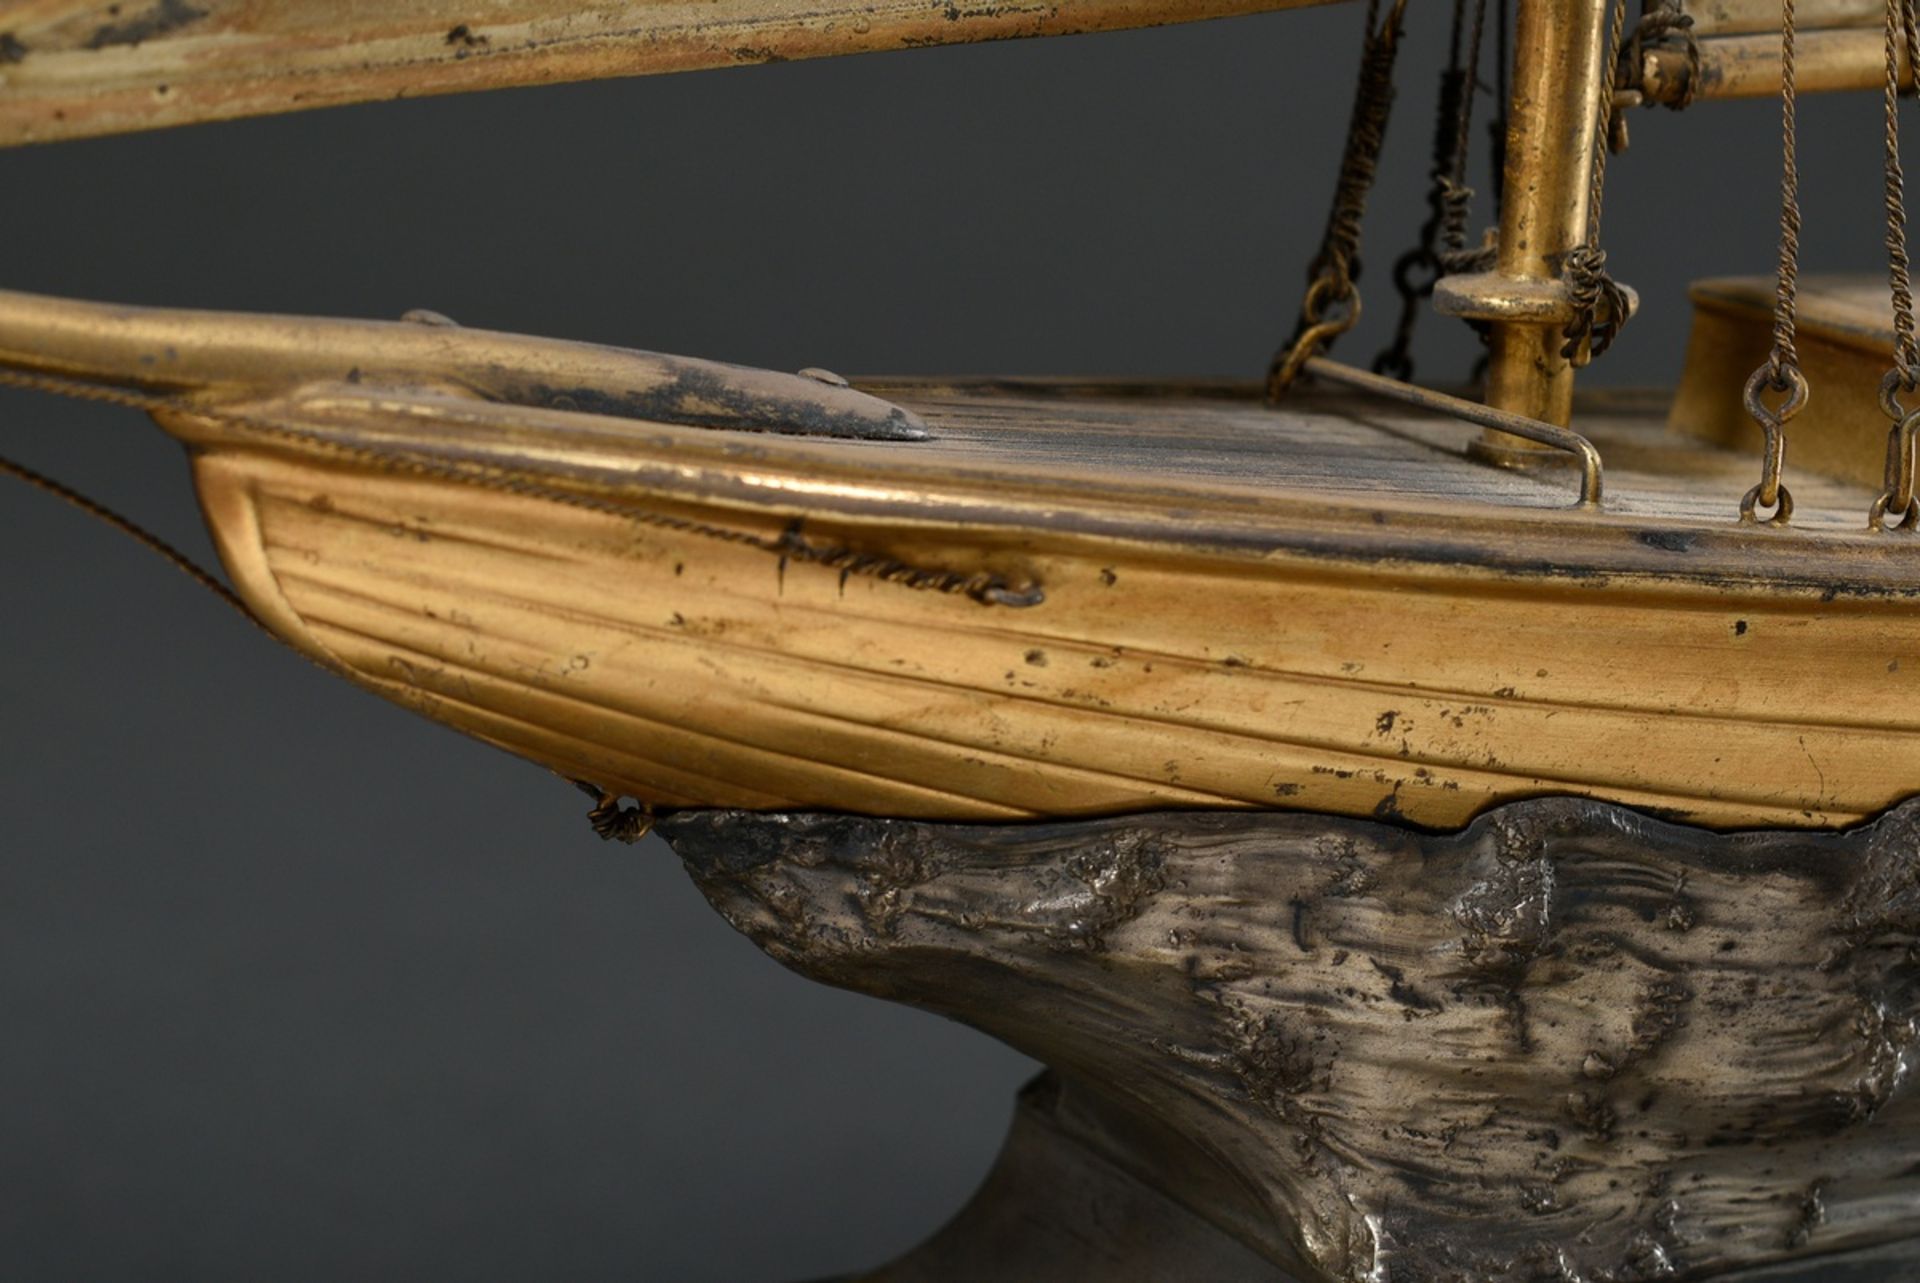 Model ship sailing price "Yacht", wood/metal, galvanised, on metal stand with sculptural waves and  - Image 6 of 9